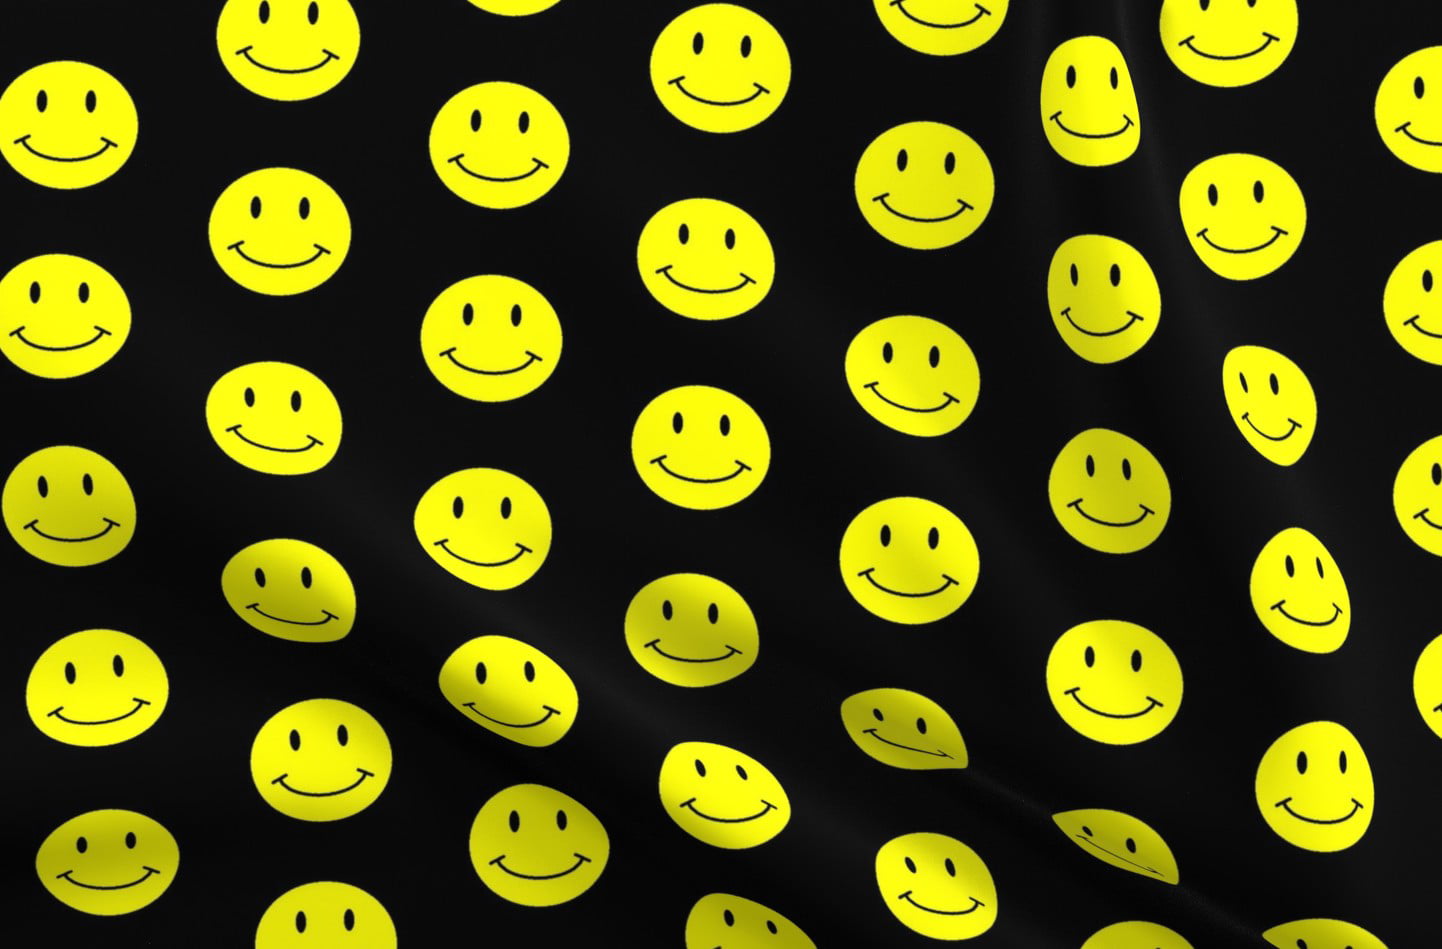 Spoonflower Fabric - Black Yellow Happy Face Smile Smiley Face Emoticon  Printed on Linen Cotton Canvas Fabric by the Yard - Sewing Home Decor Table  Linens Apparel Bags 